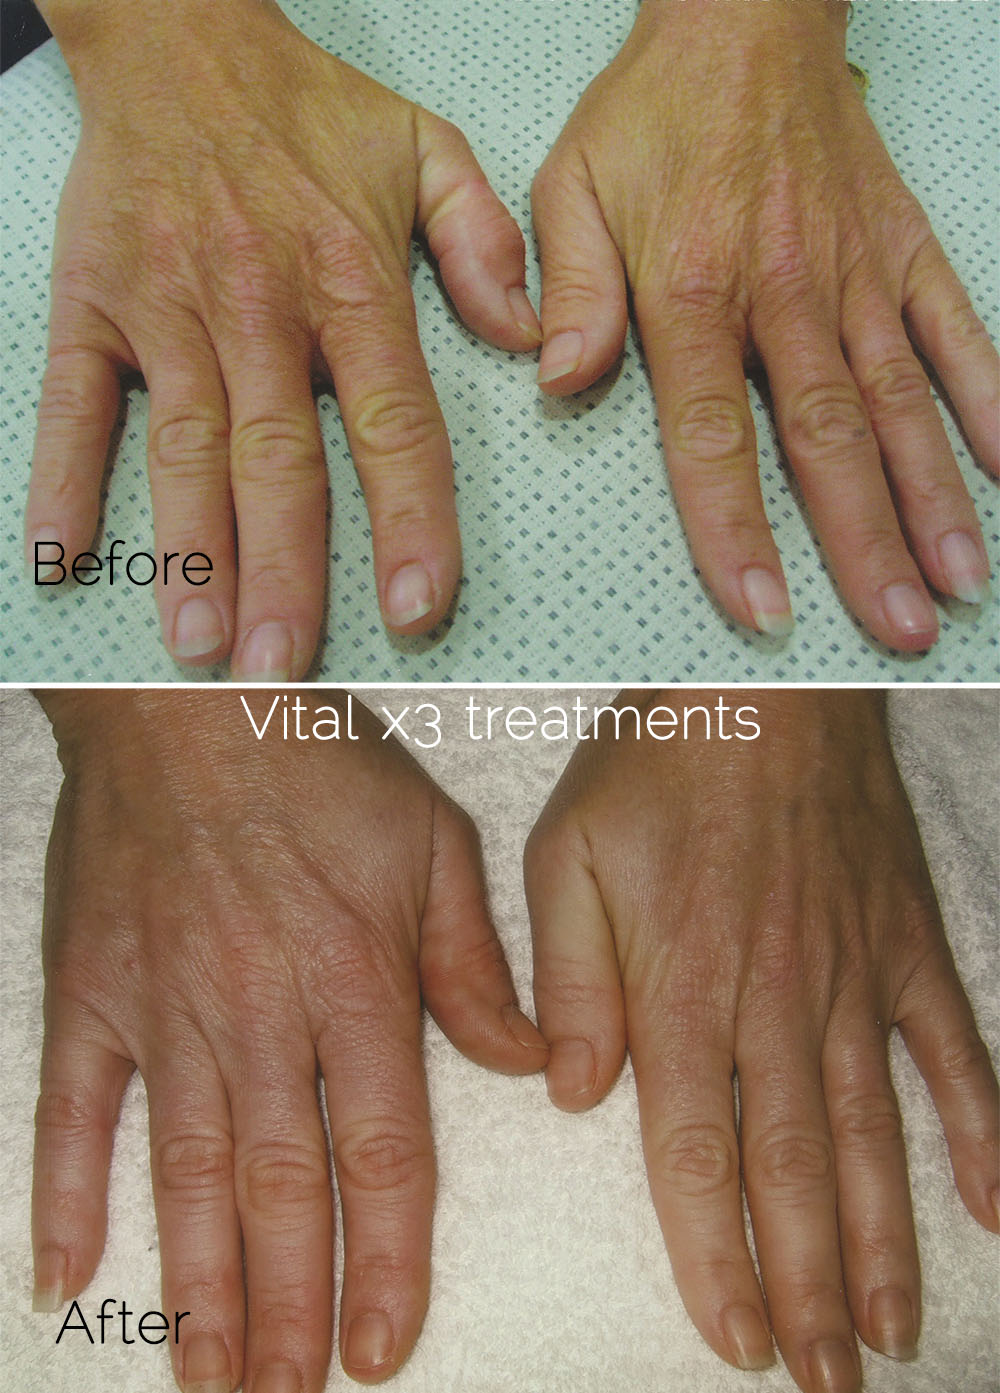 After Vital 3 treatment on hands